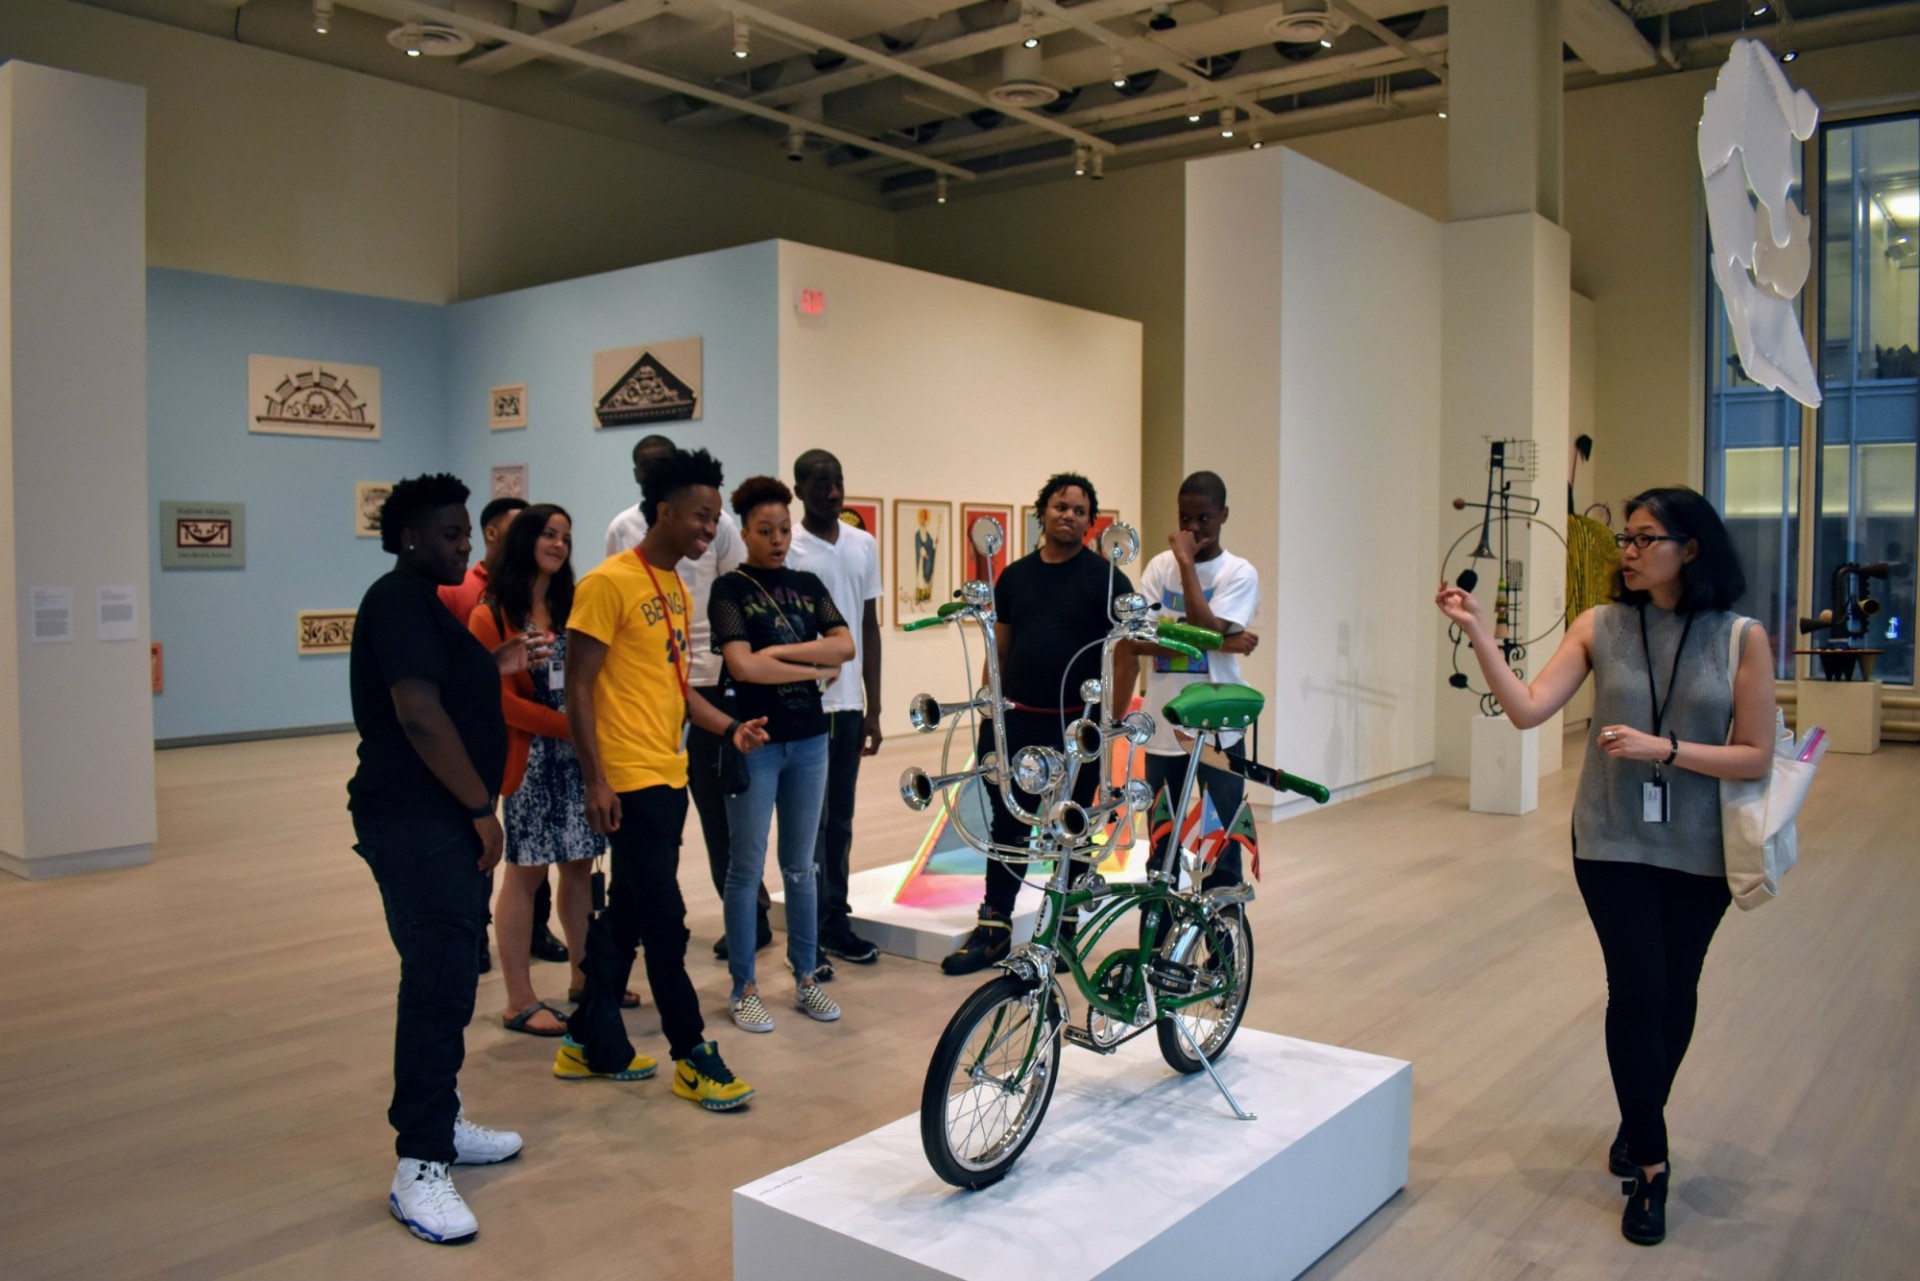 Manhattanville area youth from the Graham Windham’s SLAM program visit the Uptown triennial at the Wallach Art Gallery. The SLAM program provides long-term coaching and support for youth ages 15–23 as they transition into adulthood. Pictured: Jennifer Mock, Associate Director of Education and Public Programs at the Wallach, facilitates a tour of the gallery and explores concepts in art through a variety of exercises. Photo credit: Bashar Makhay